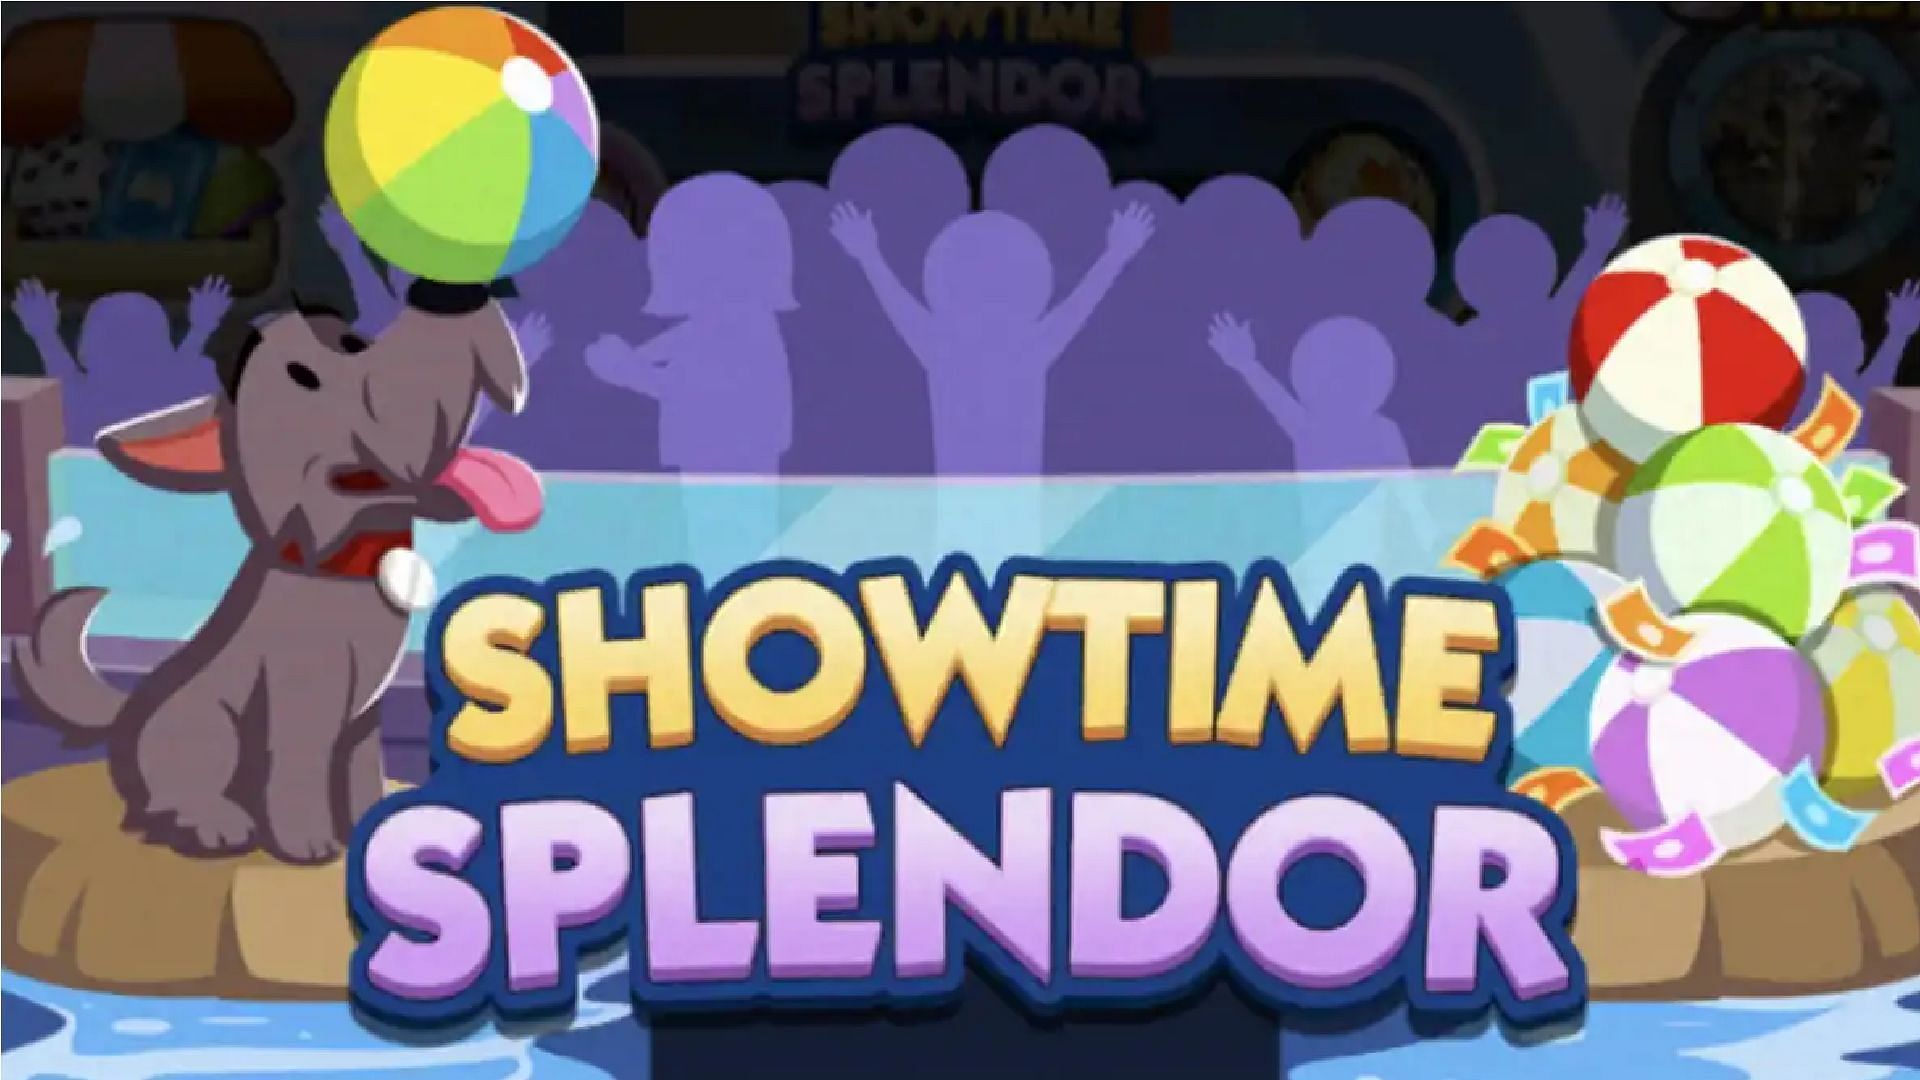 The Showtime Splendor is an ongoing event with plenty of event-exclusive tokens as rewards (Image via Scopely)